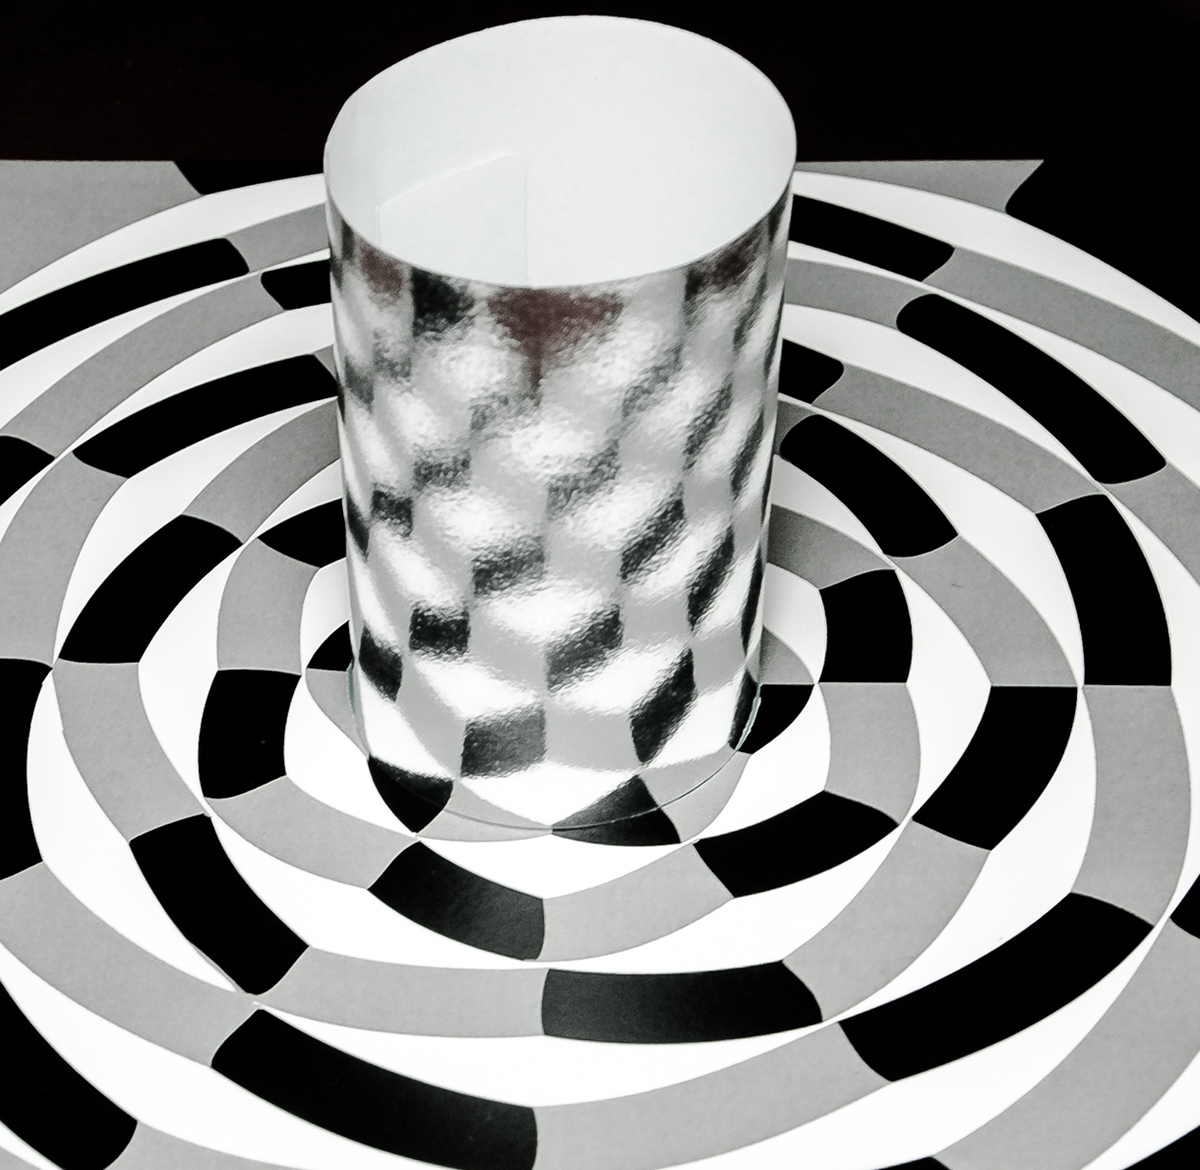 cubes anamorphosis anamorfose cylinder mirror projection Changes black and white illusion